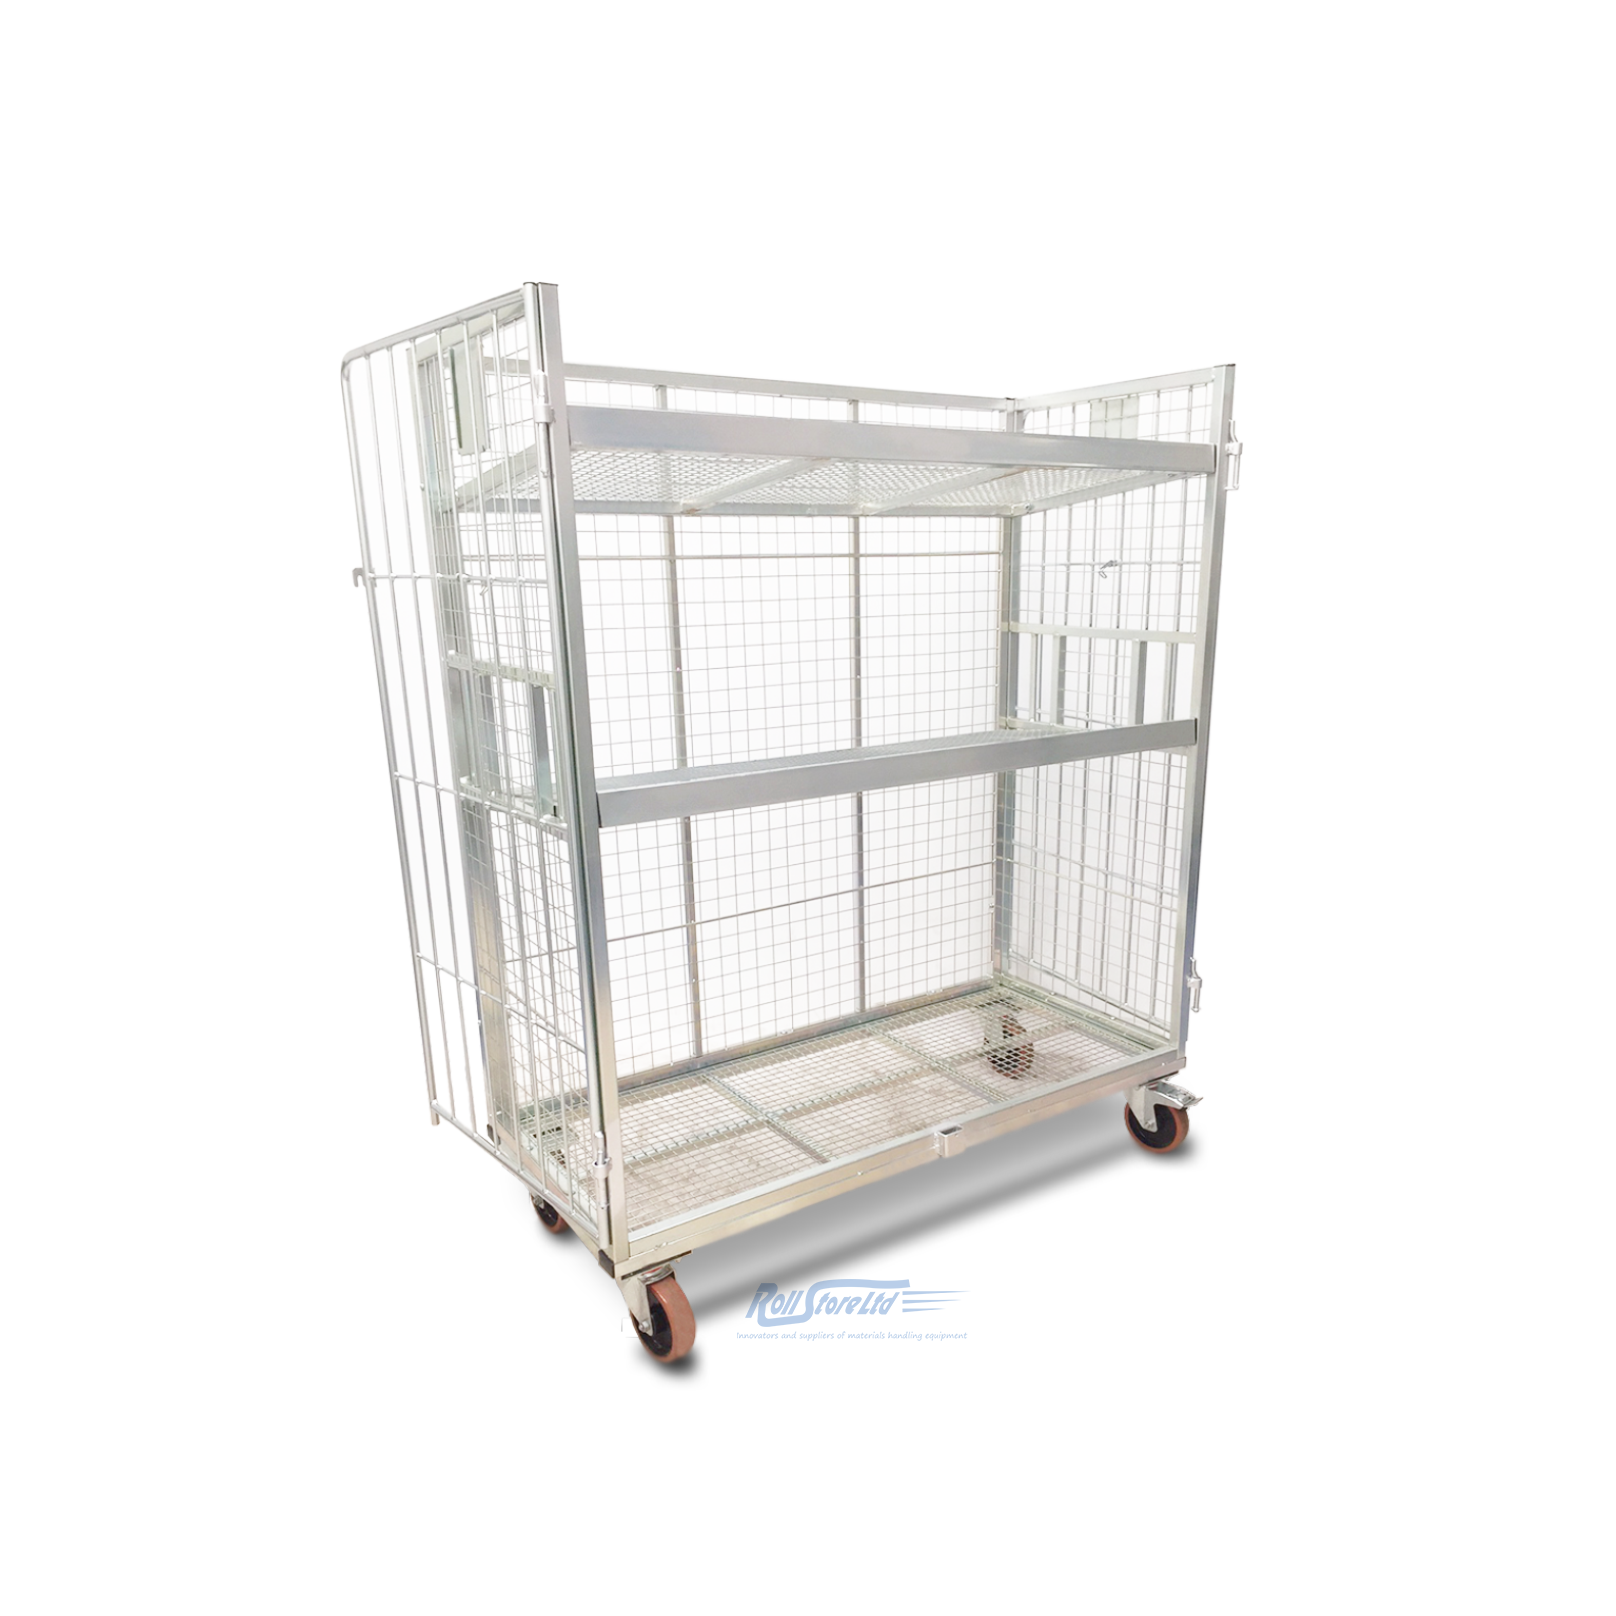 4 Sided Food Freezer Roll Cage (Double size)